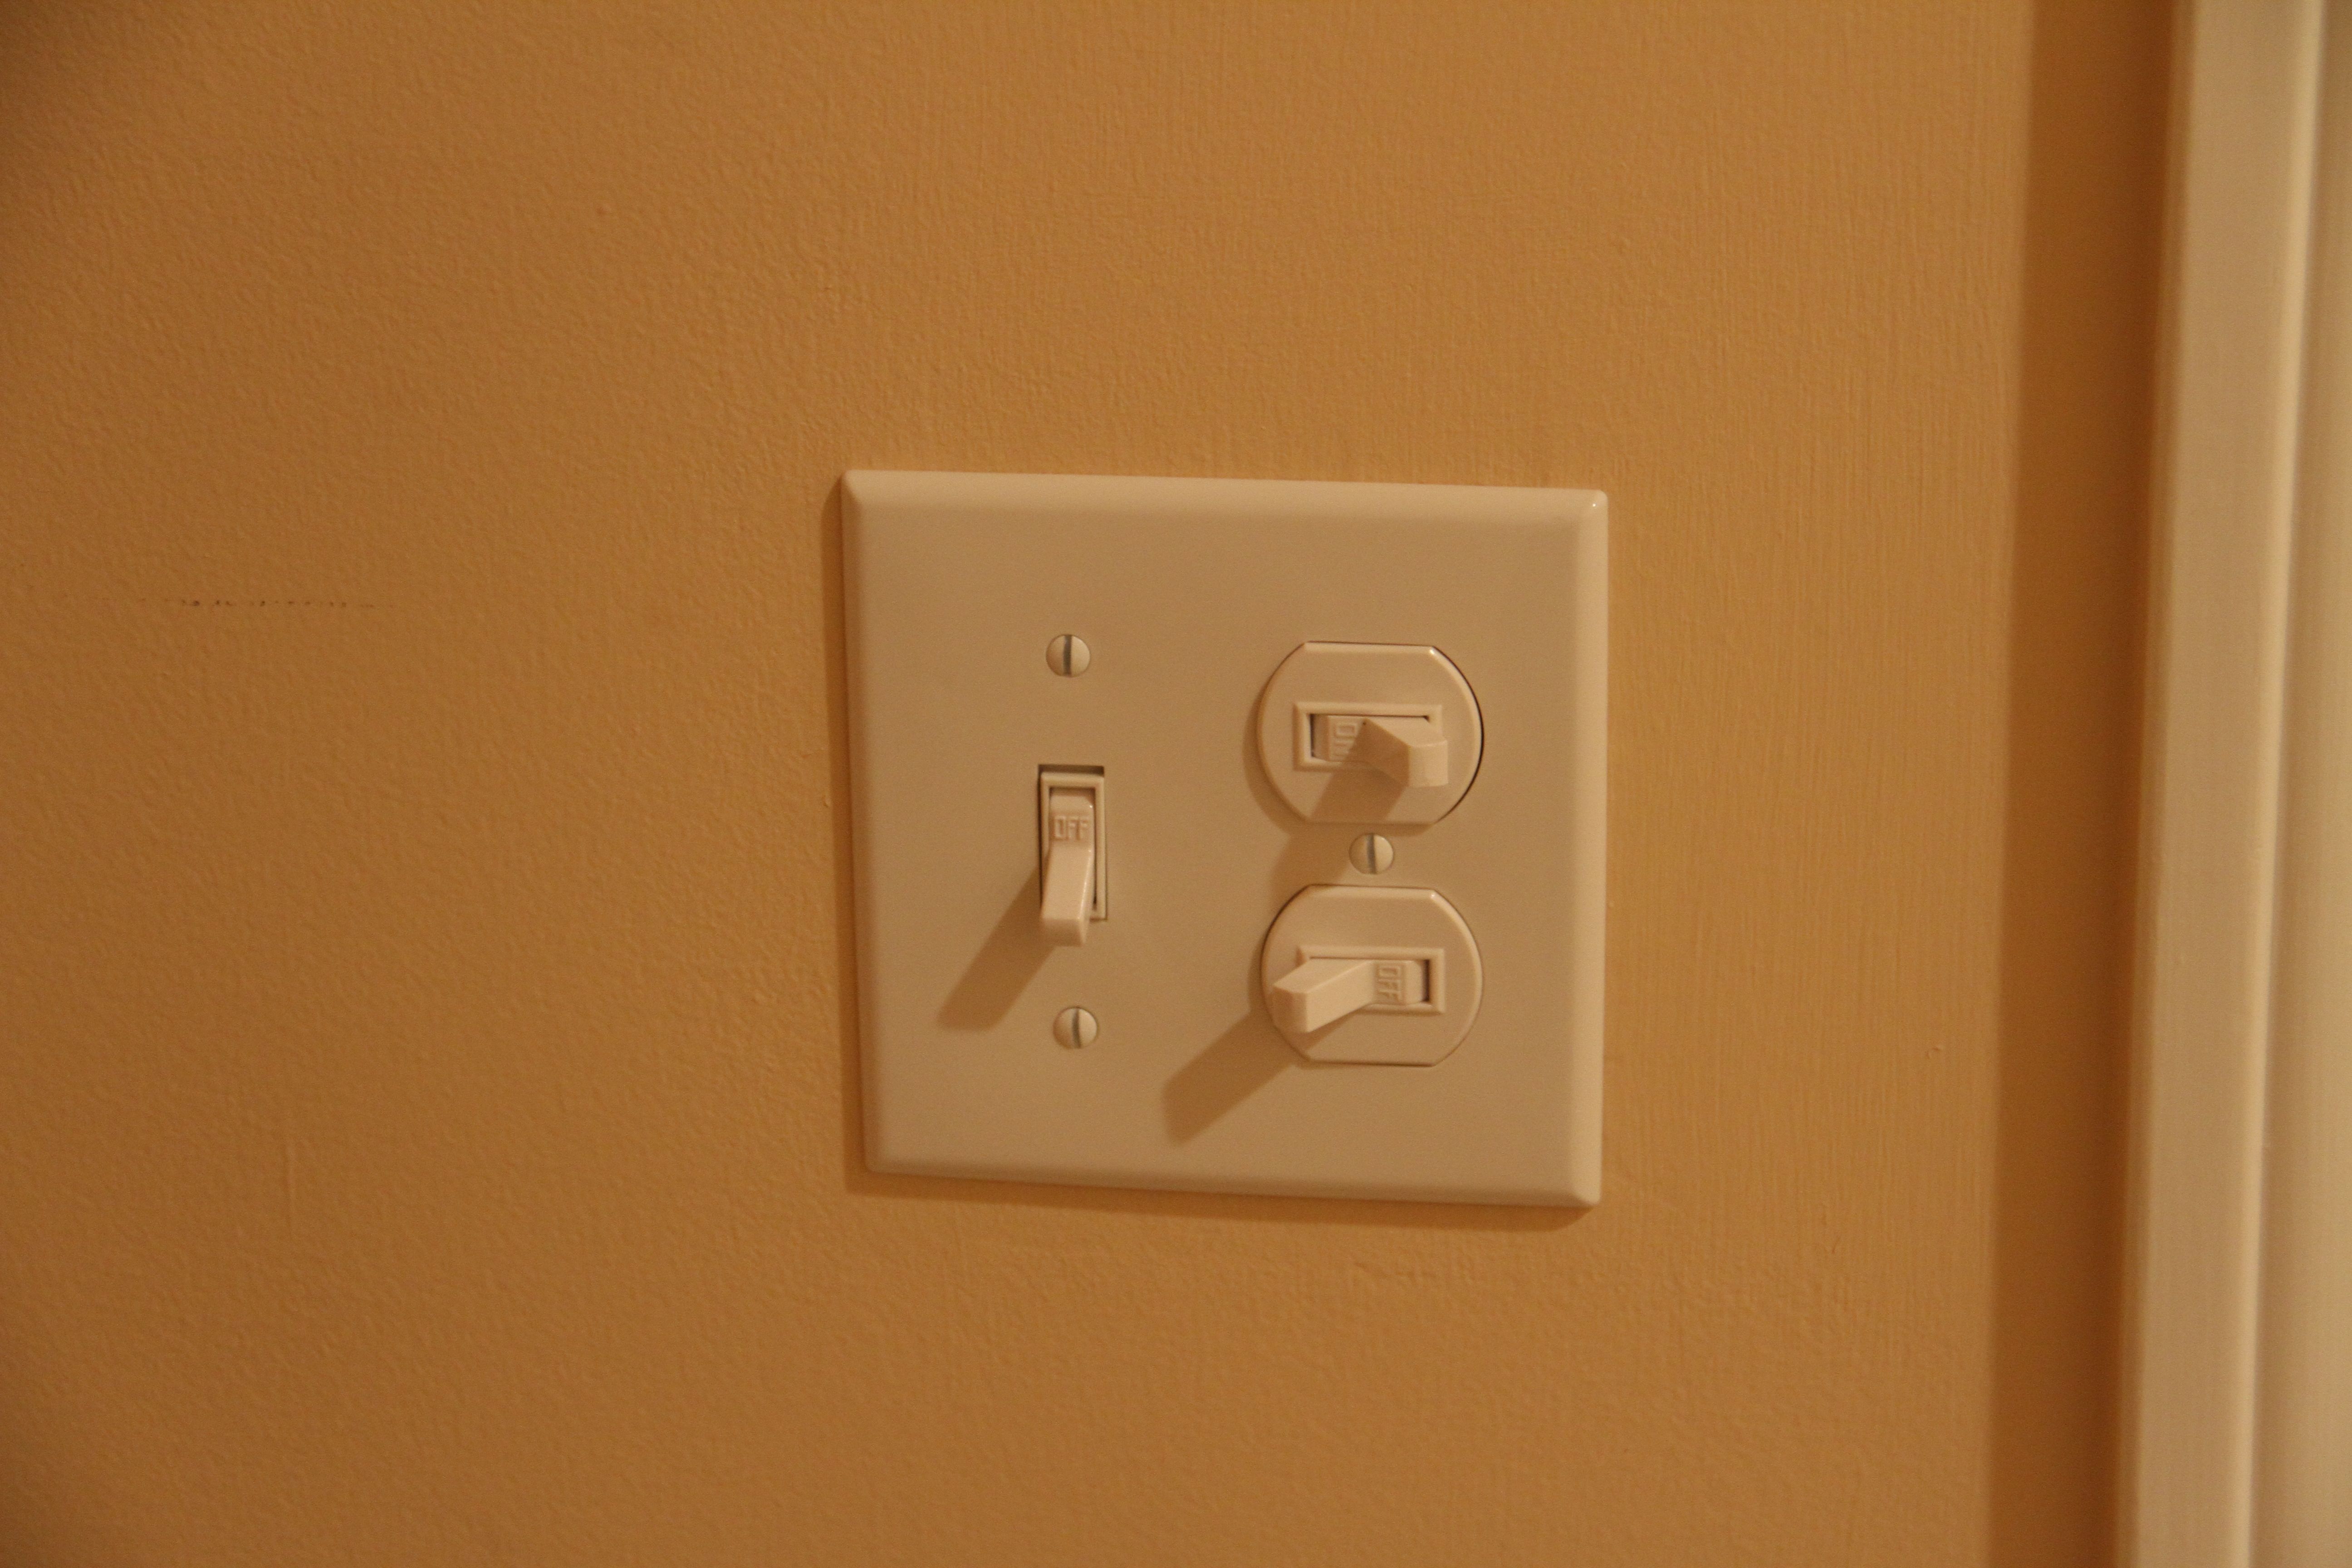 So we have switches in the laundry room (adding one for the new, but empty, wall sconce box).